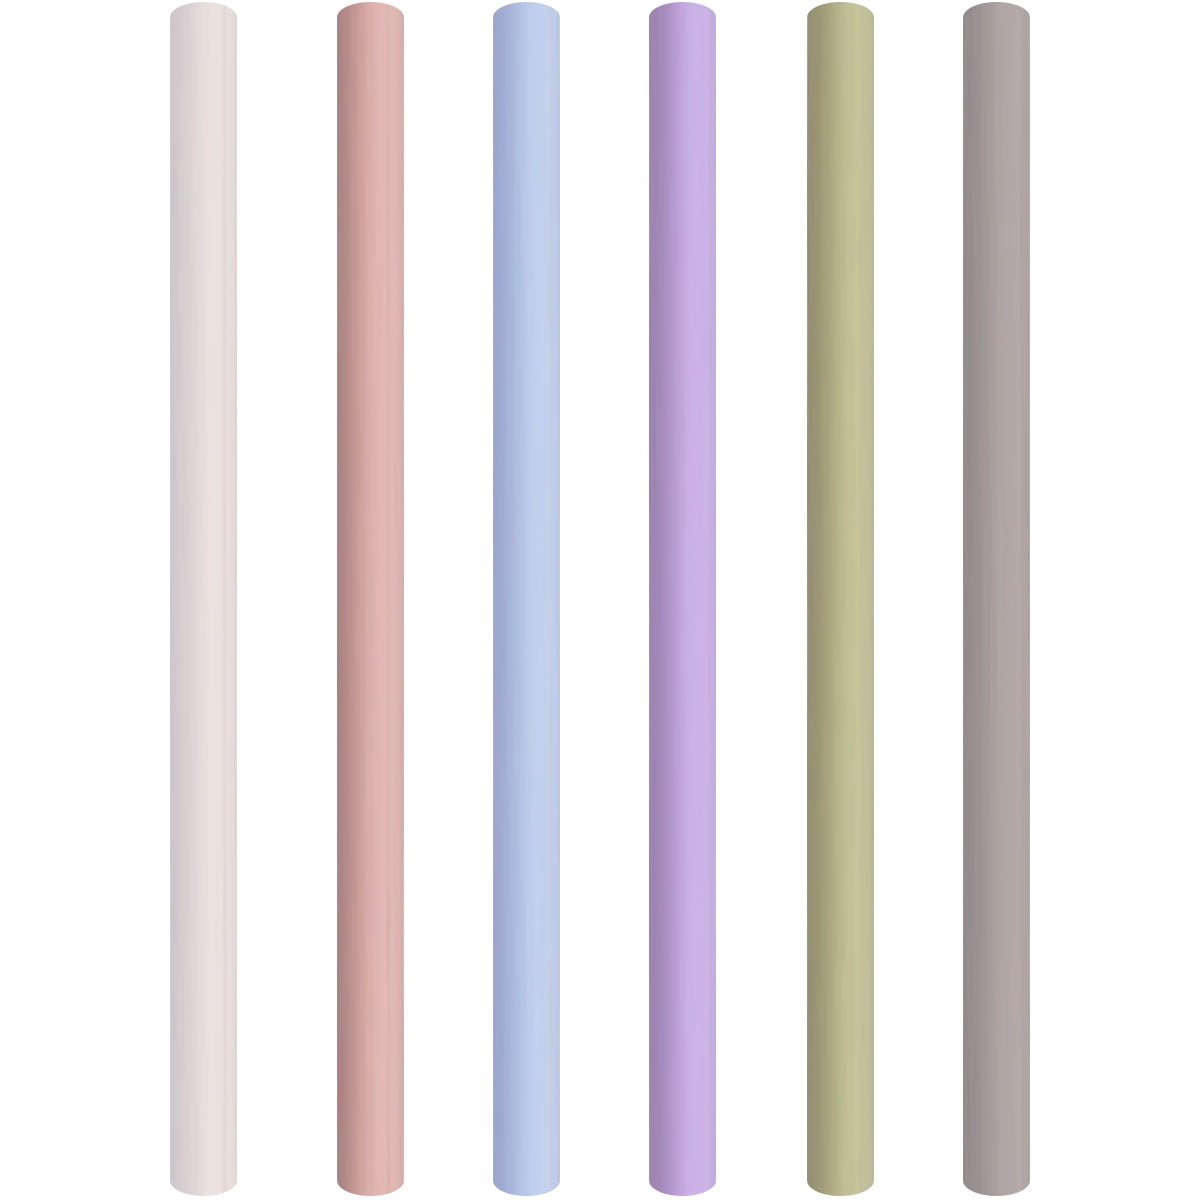 Straight and Bendy Separate 0.4 Extra Wide Straws for Bubble Tea/ Boba/ Smoothies 6 Pack Reusable Straws Silicone with Cleaning Brush